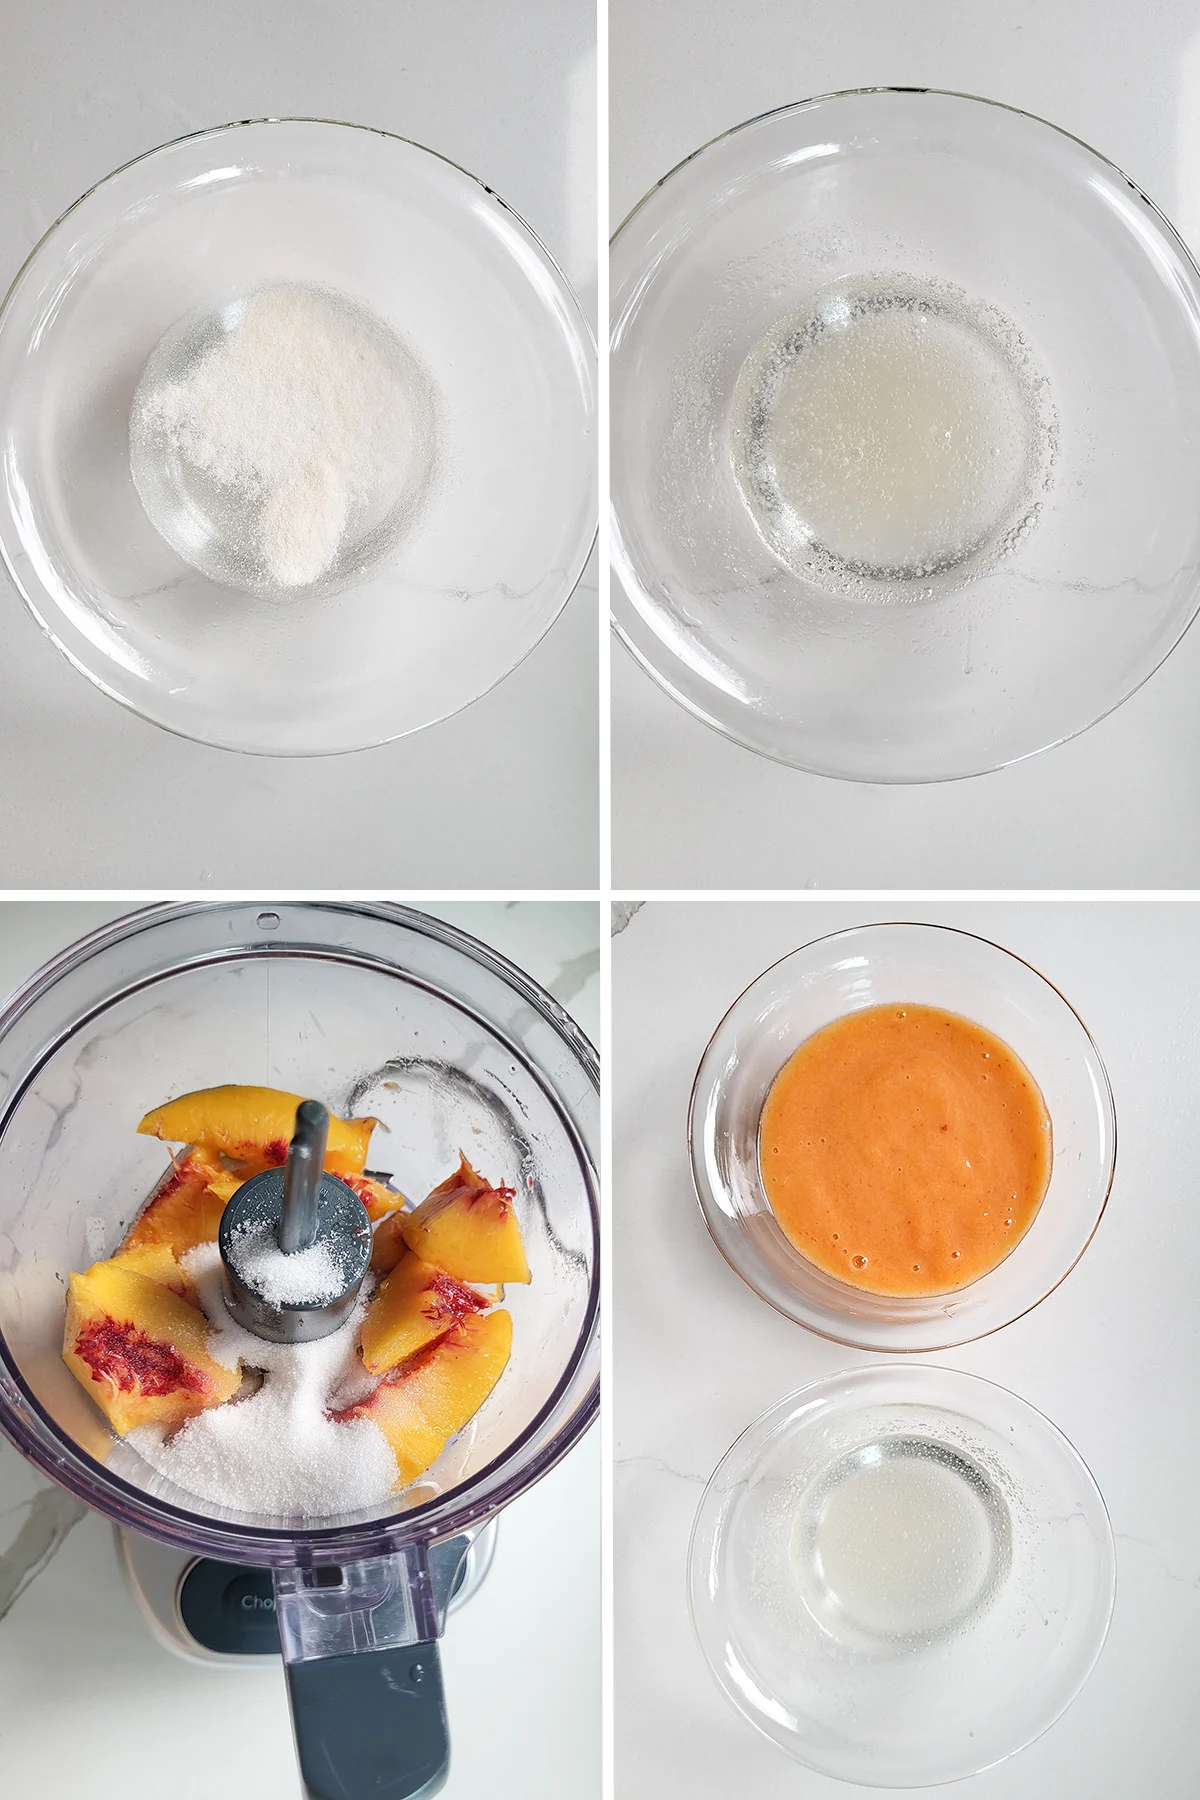 Gelatin blooming. Peaches in a food processor. A bowl of peach puree and a bowl of gelatin.